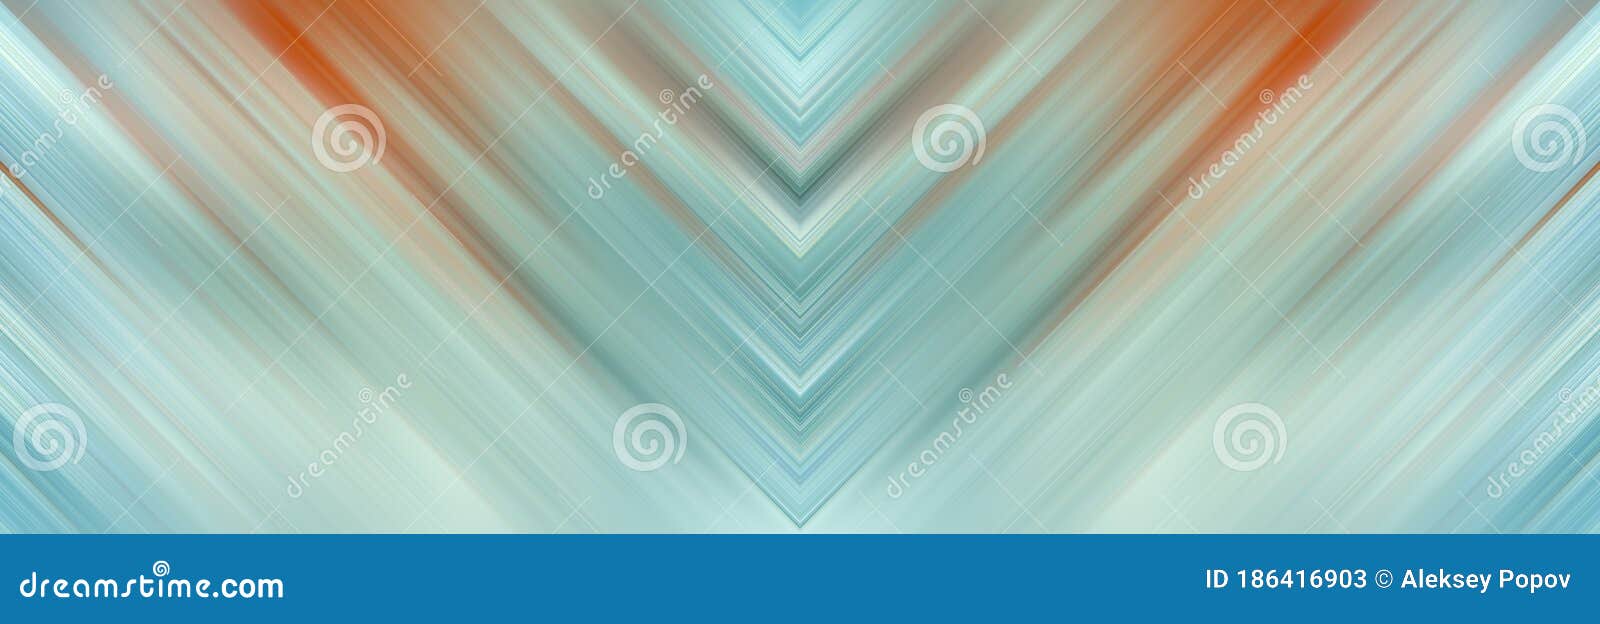 azure abstract geometric background.